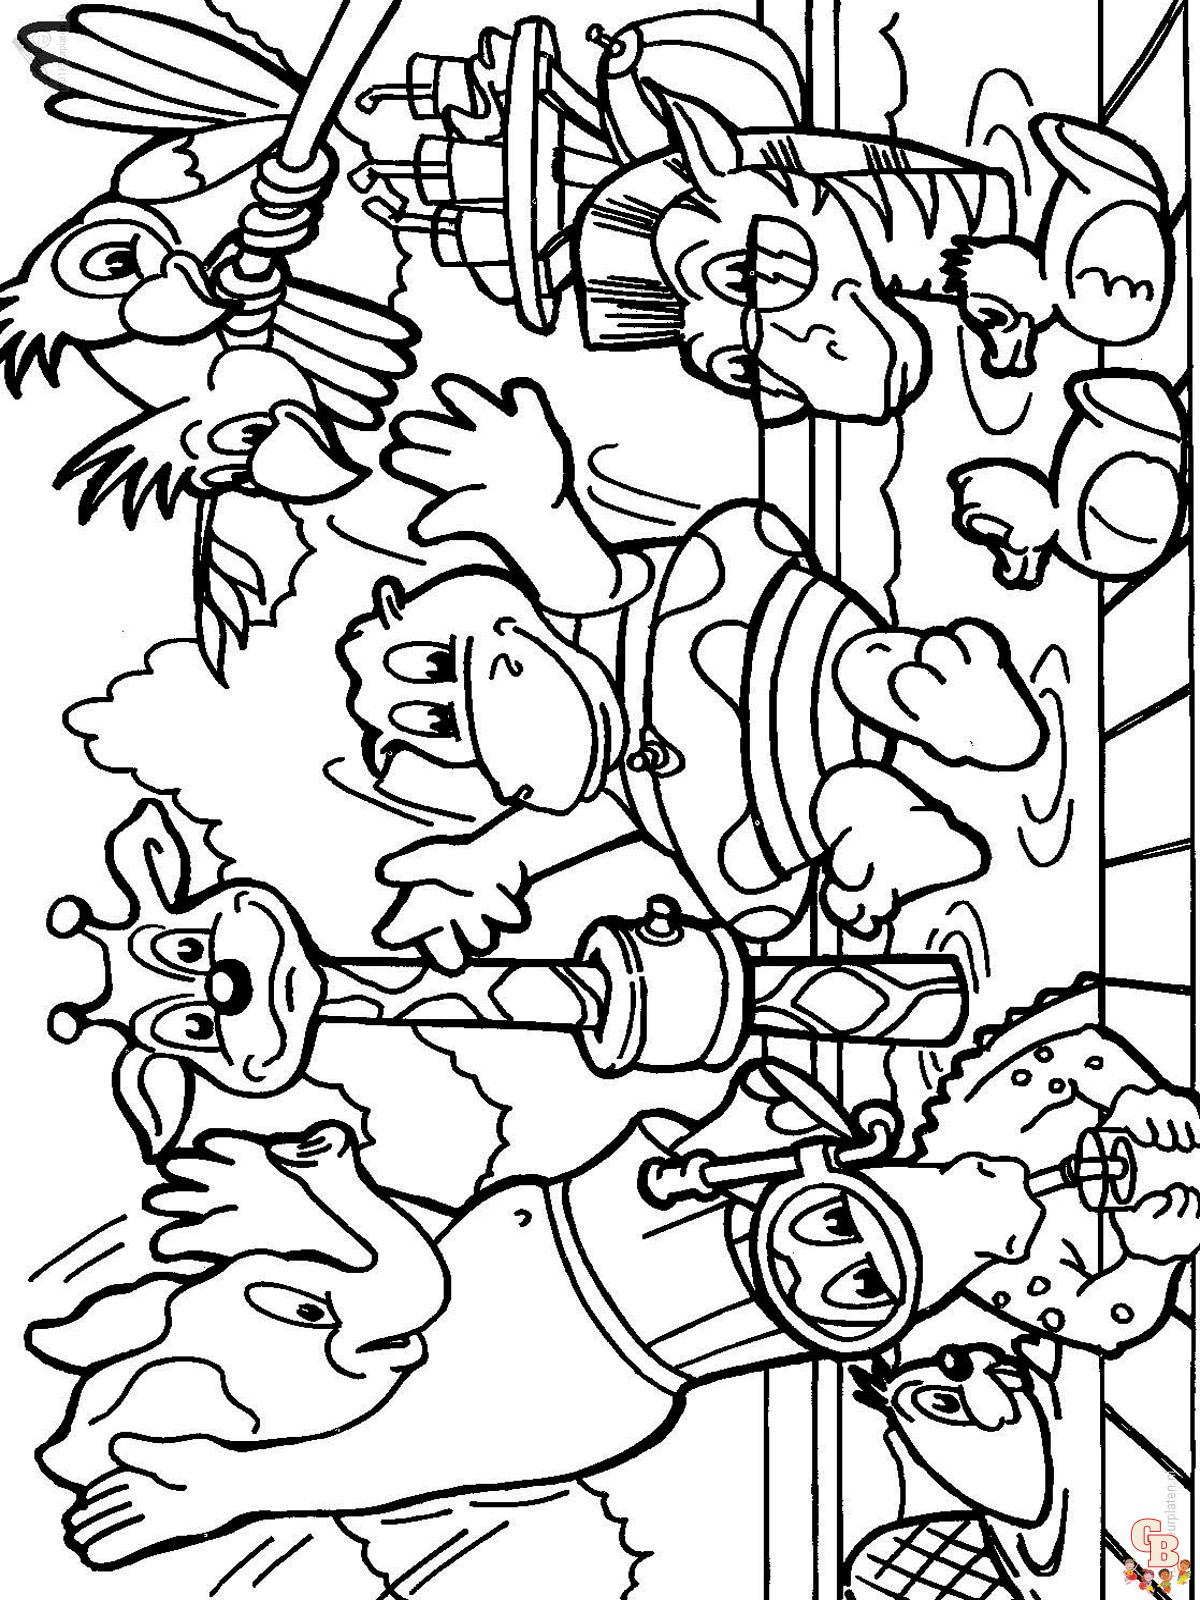 Zoo Coloring Pages 12